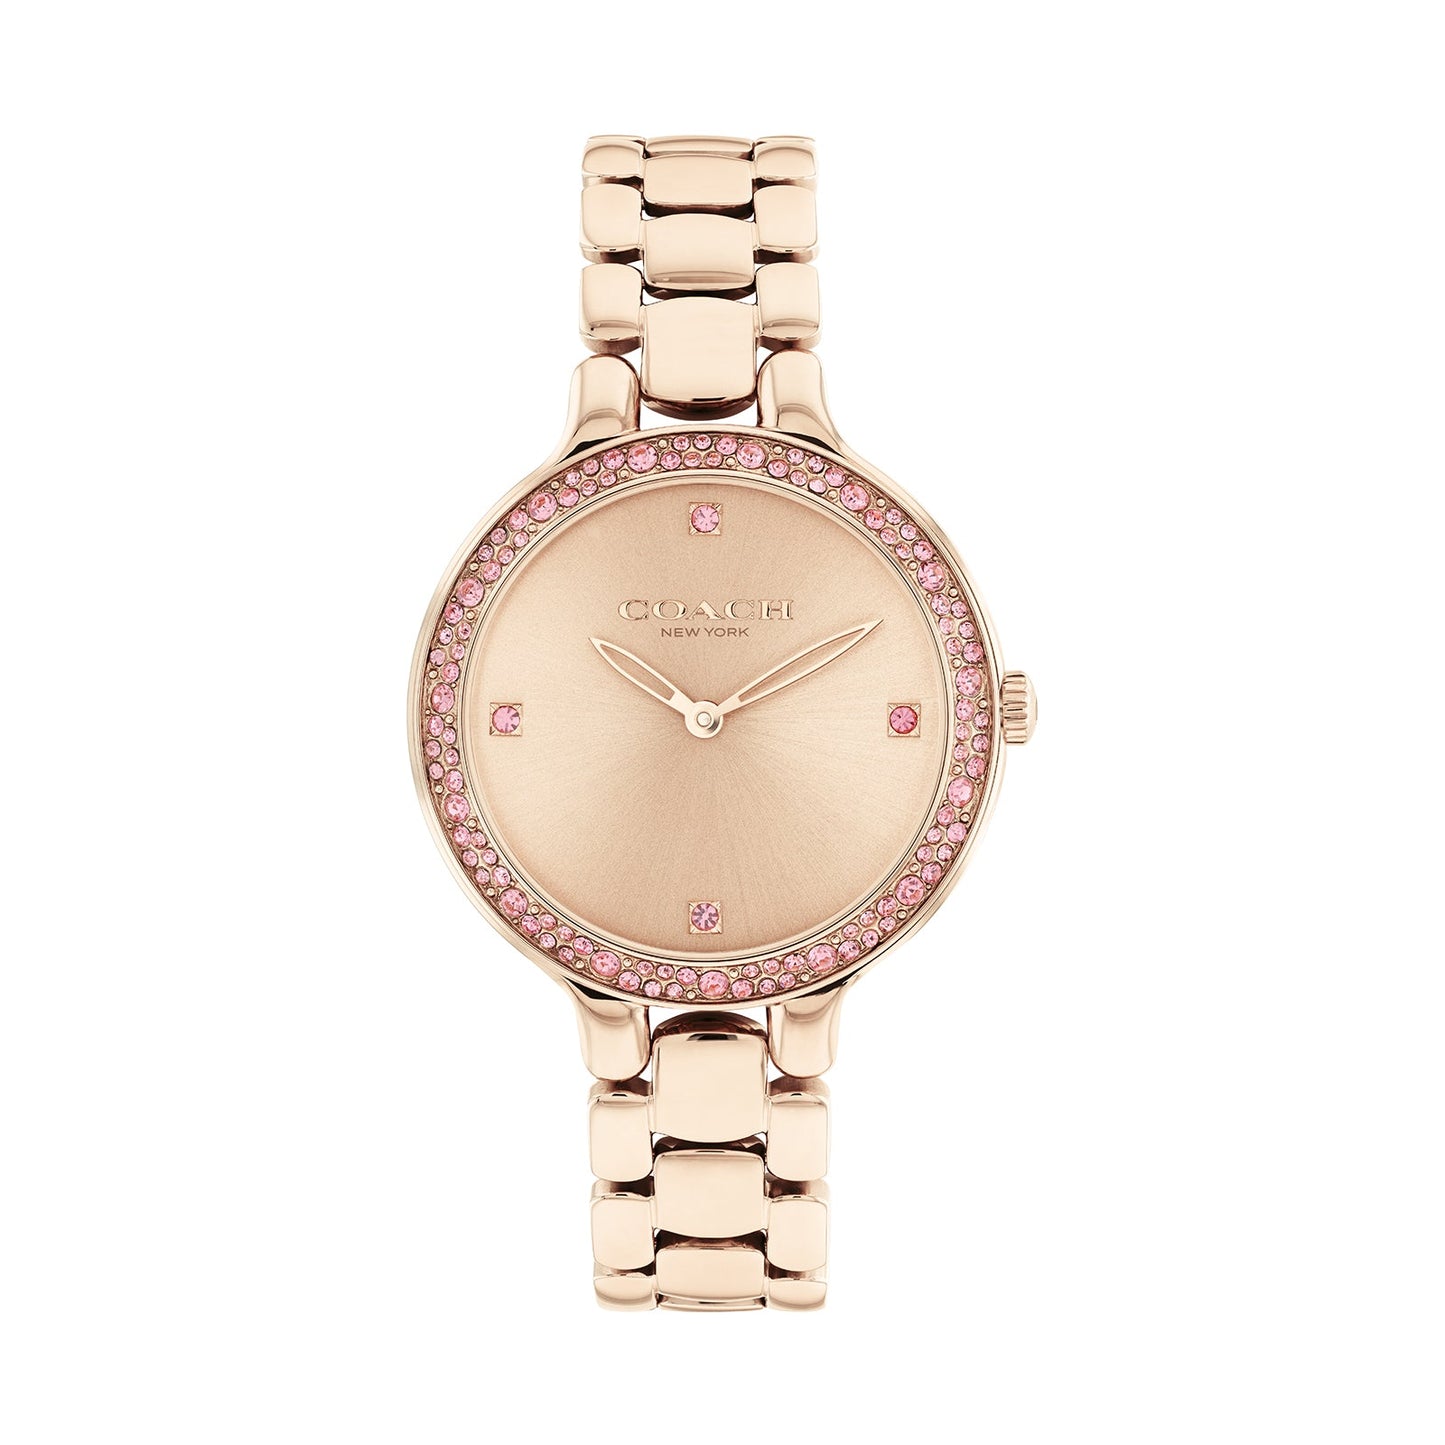 Coach 14504126 Women's Carnation Gold Stainless Steel Bracelet and Carnation Gold Dial Quartz Watch